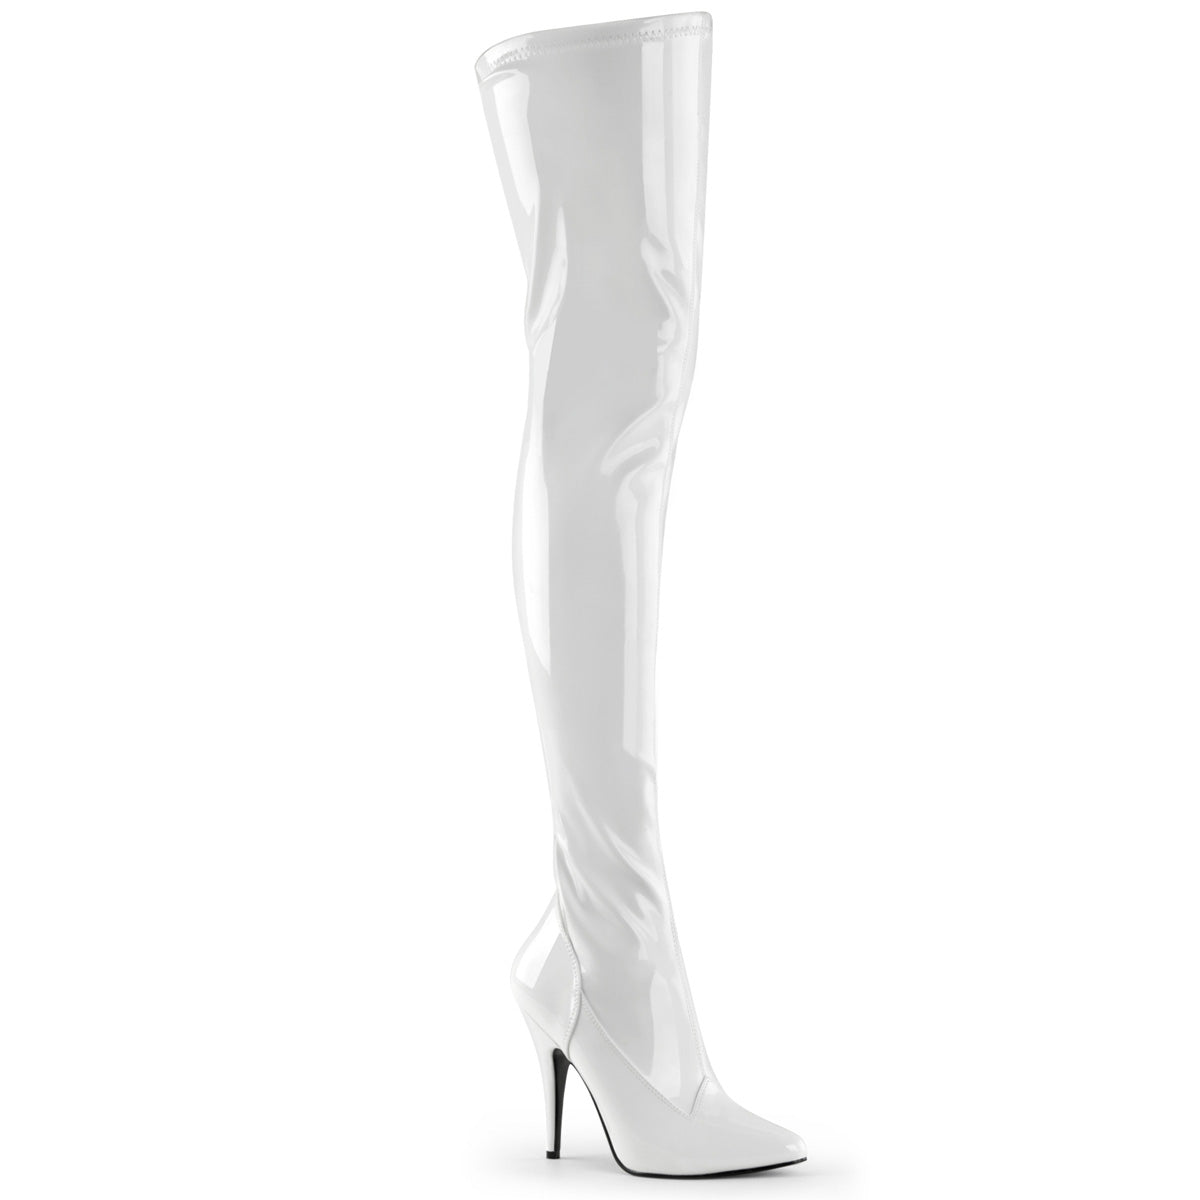 SEDUCE-3000 Pleaser 5 Inch Heel White Patent Fetish Footwear-Pleaser- Sexy Shoes